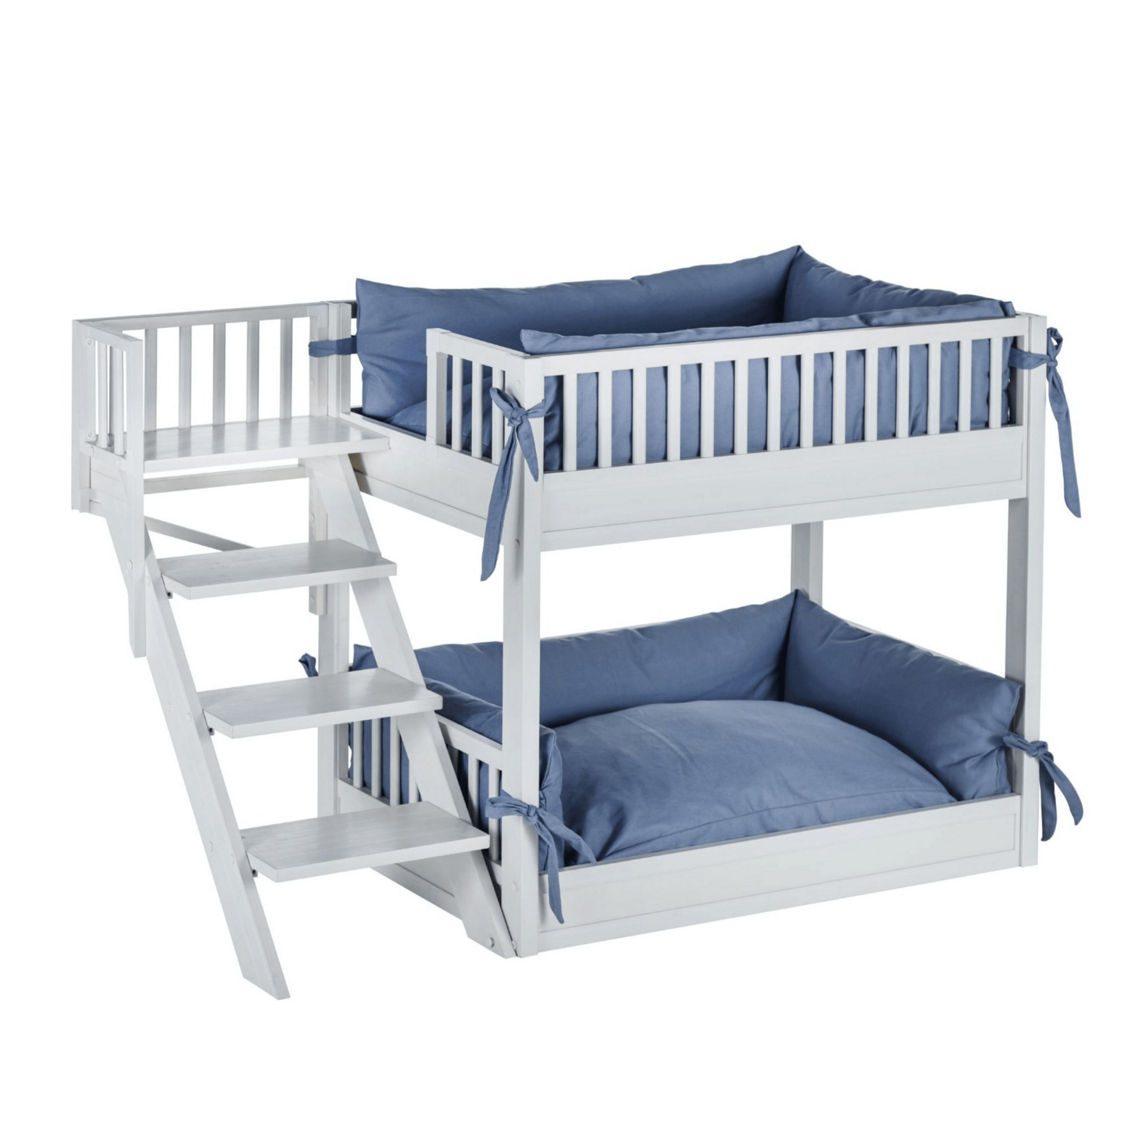 New Age Pet® ECOFLEX® Dog Bunk Bed with Removable Cushions - Grey - Image 2 of 5